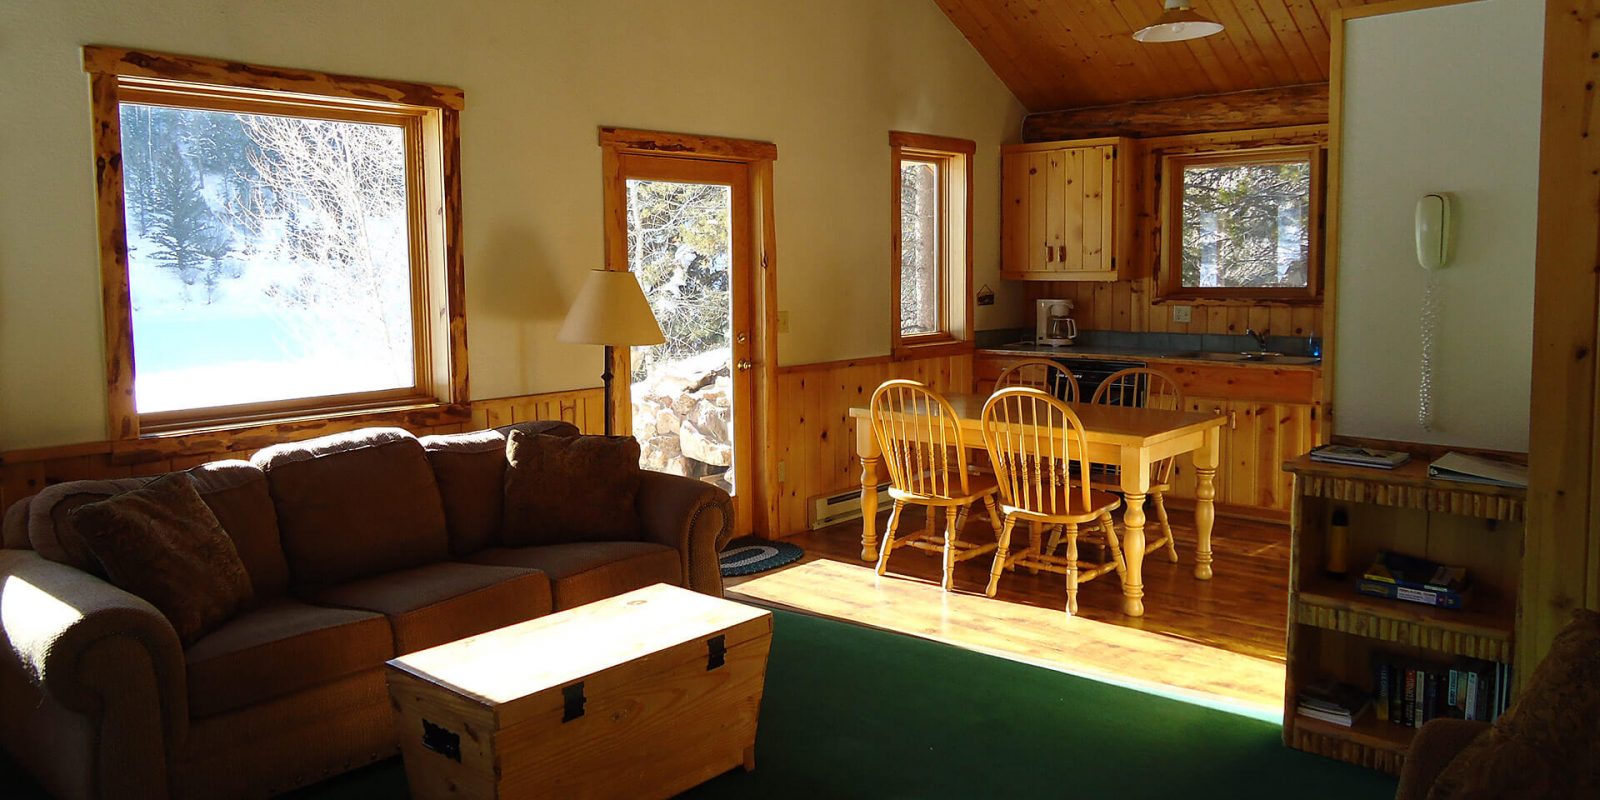 Cabin 3 living room and kitchen and dining areas